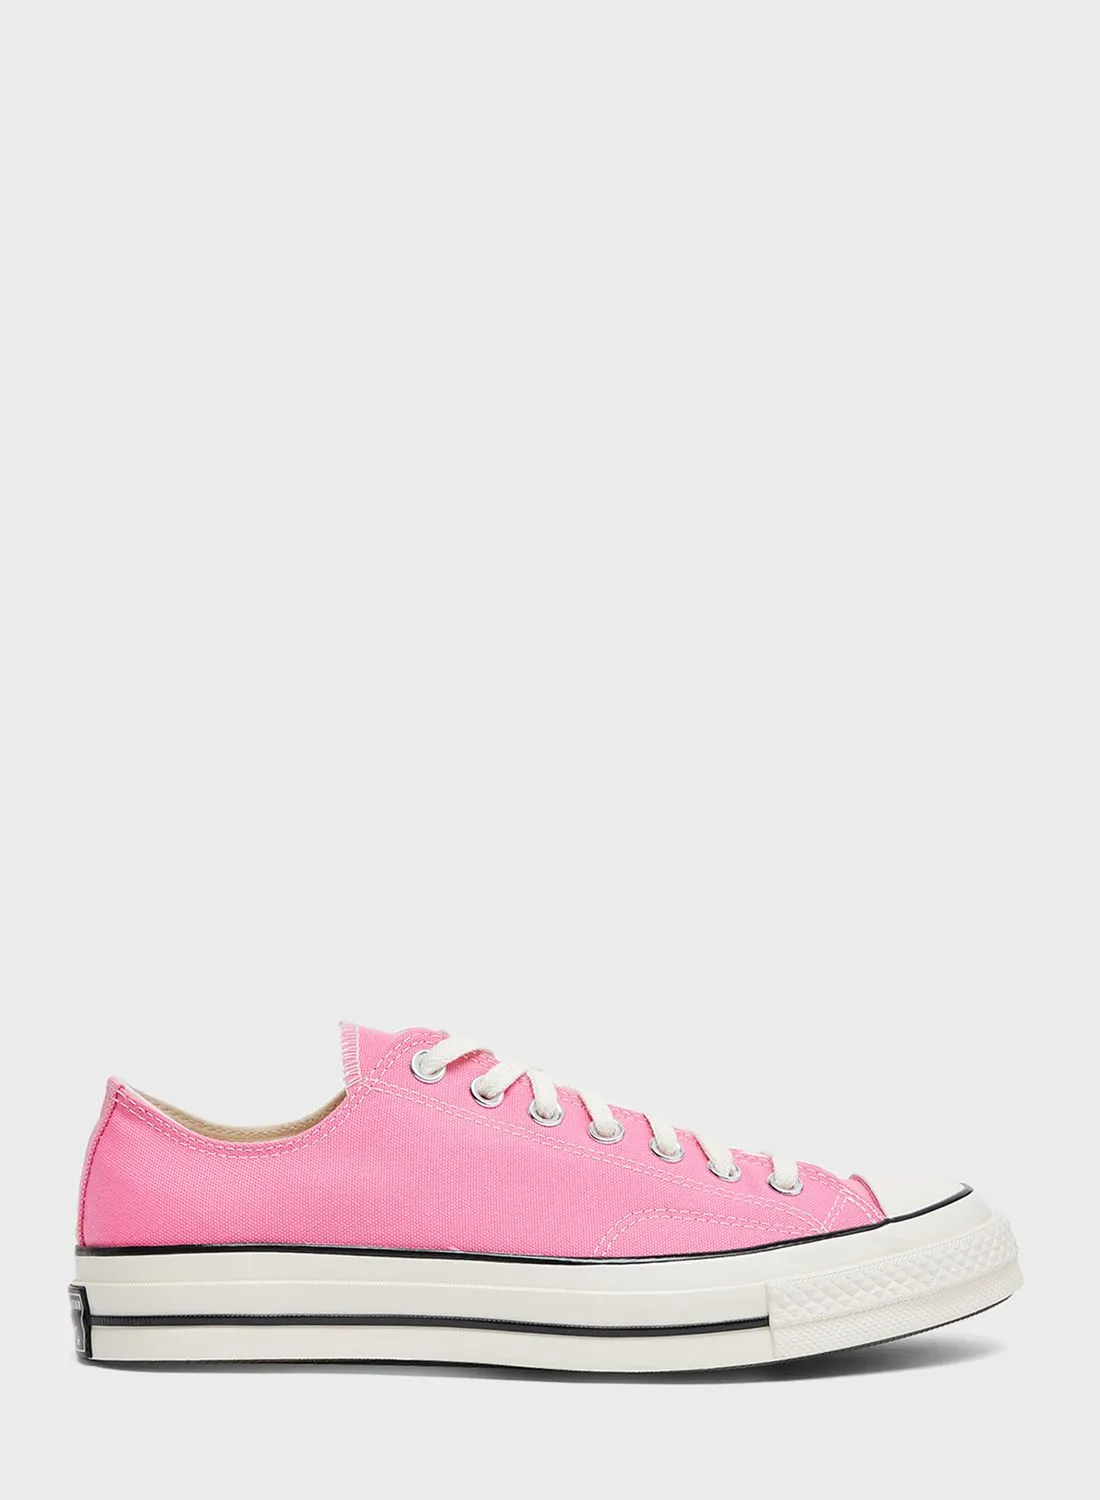 CONVERSE Unisex Chuck Taylor All Star 70 Sneakers